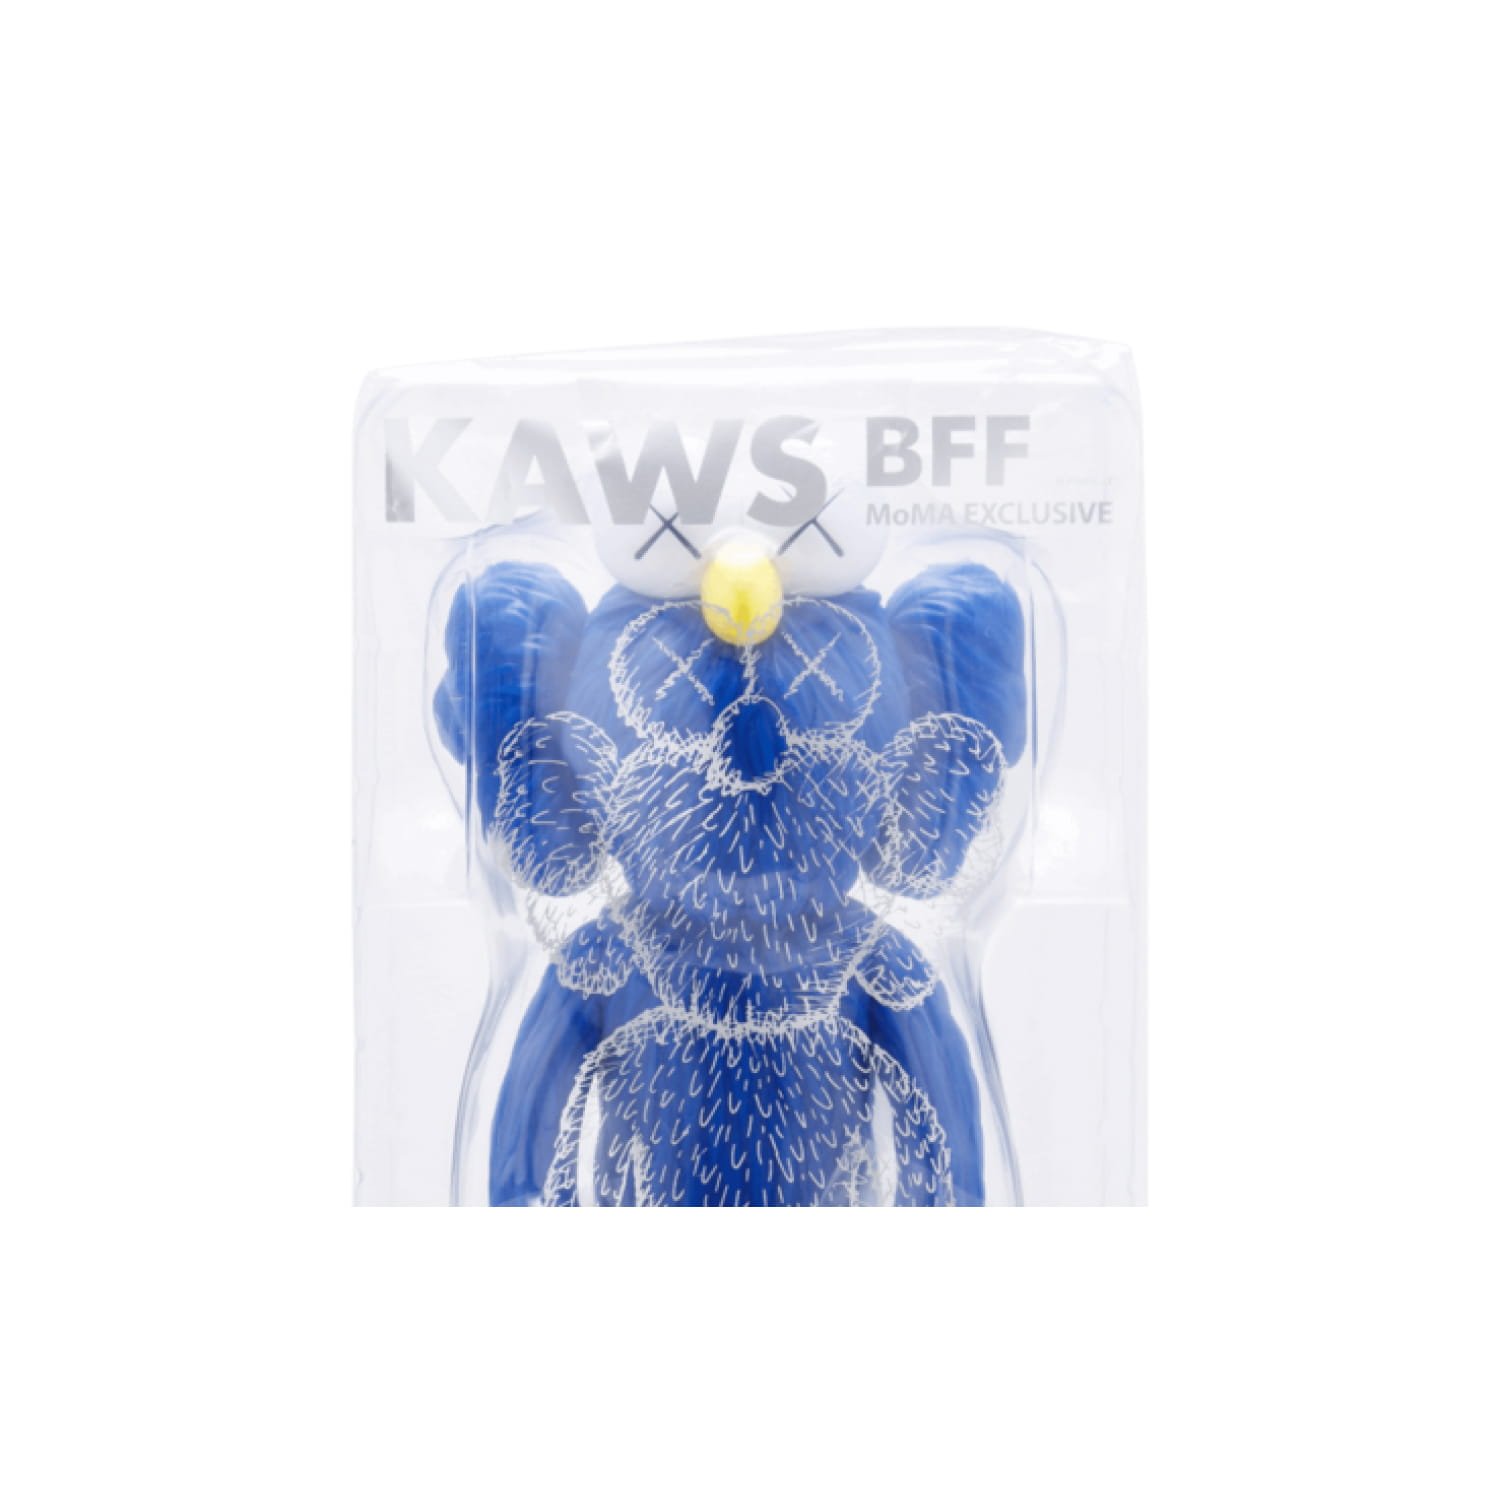 Kaws | BFF BLUE MOMA EXCLUSIVE - Dope! Gallery